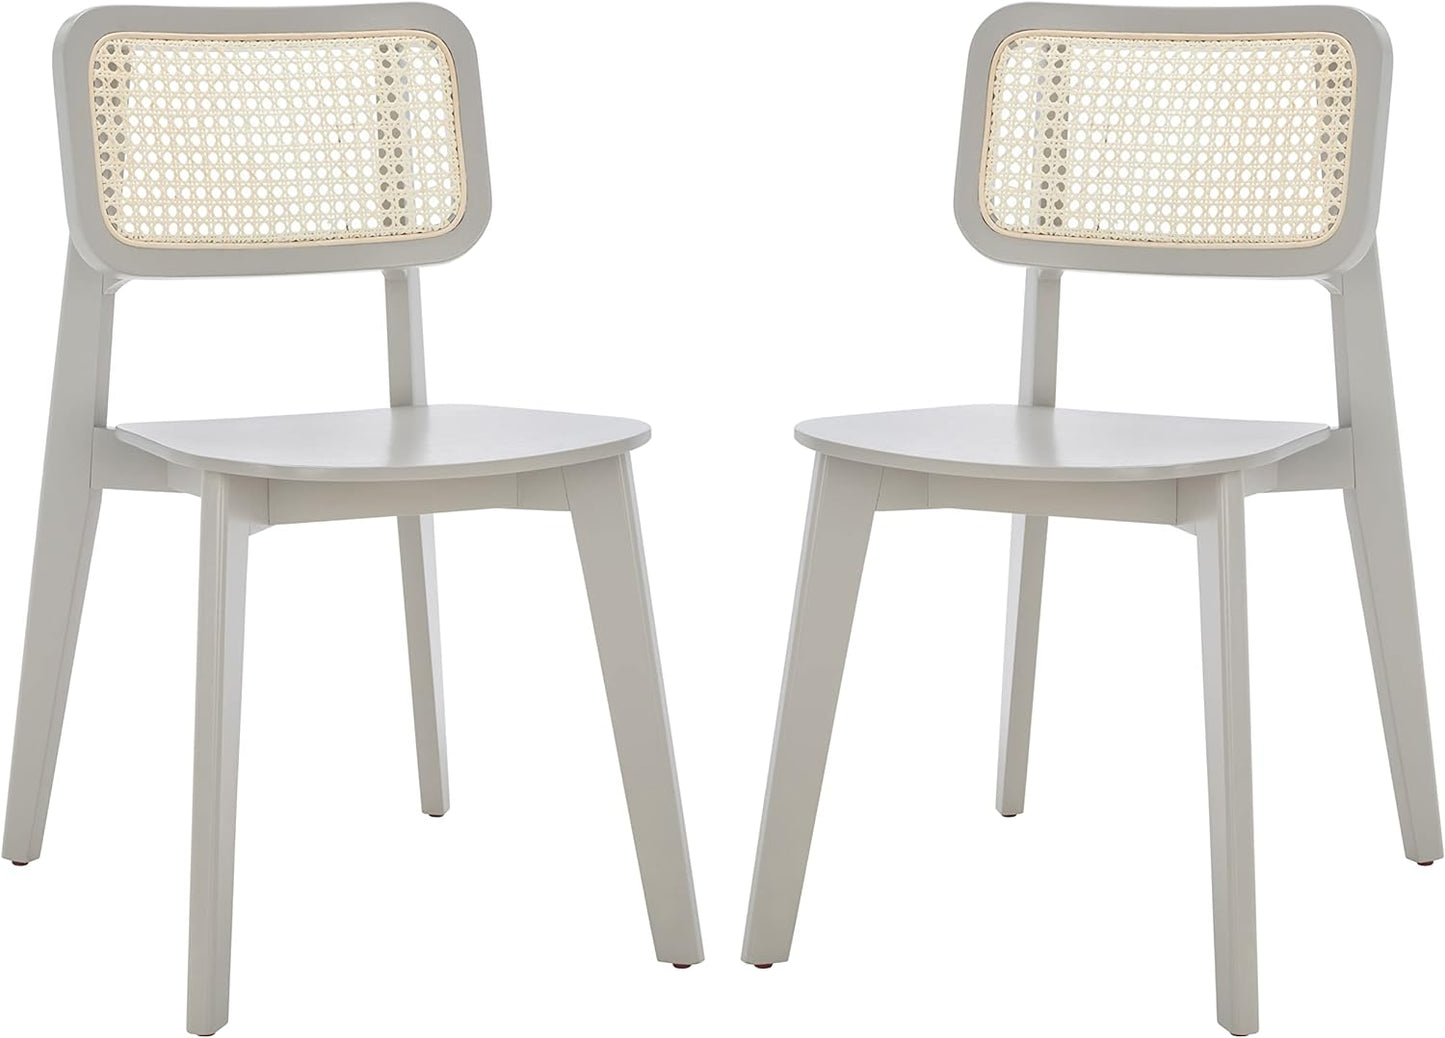 Safavieh Home Collection Luz Coastal Grey/Natural Cane Rattan (SET OF 2) Dining Chair